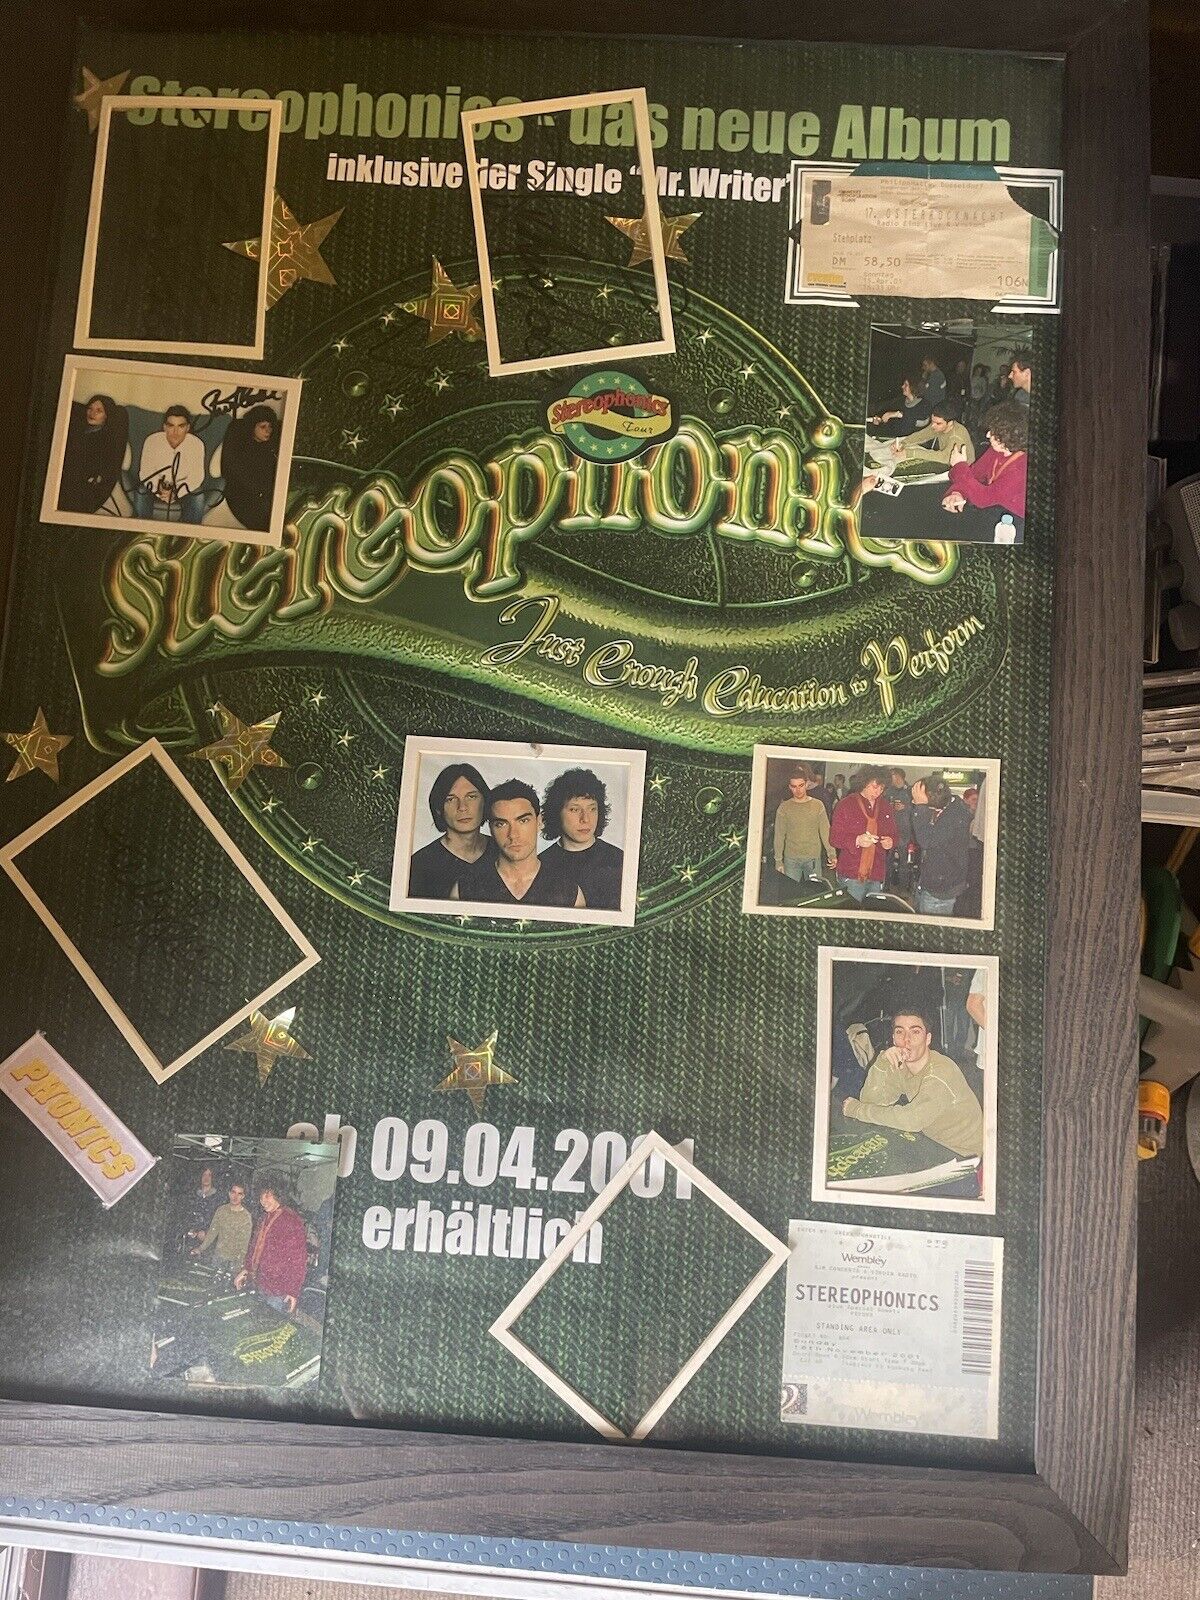 Stereophonics signed All Band members Poster in Düsseldorf 2001